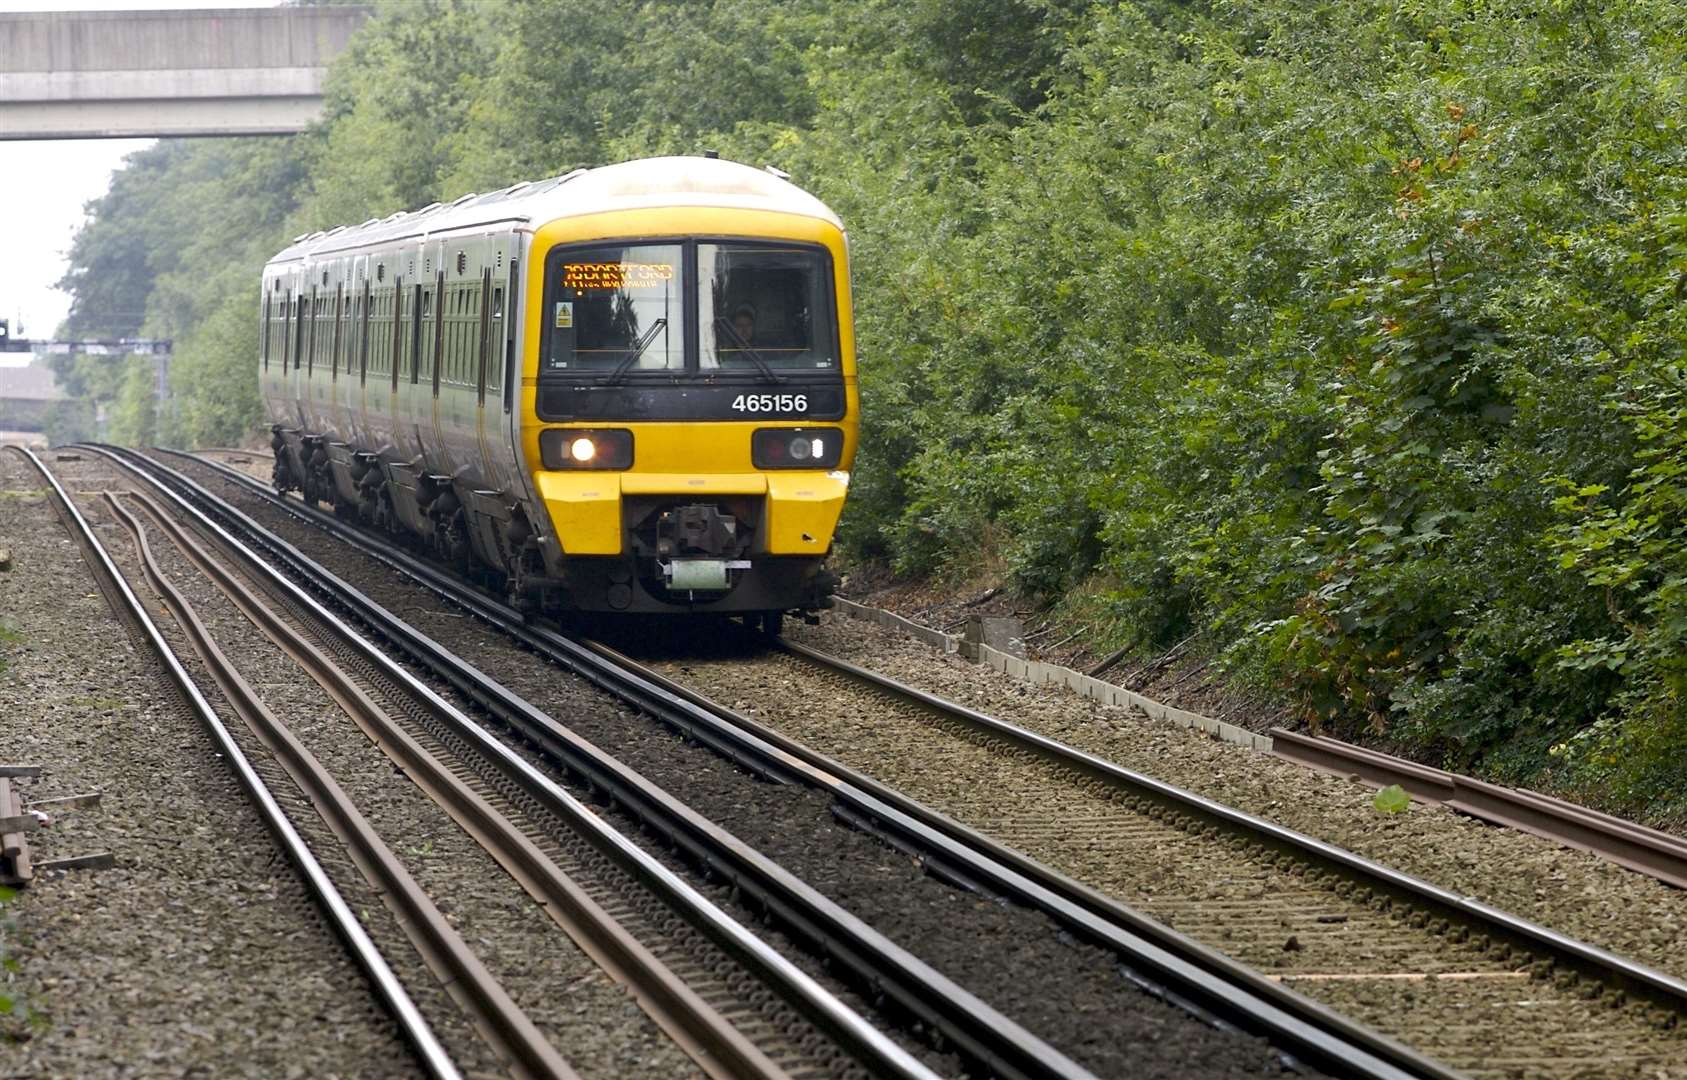 Southeastern's services should not change in the short term